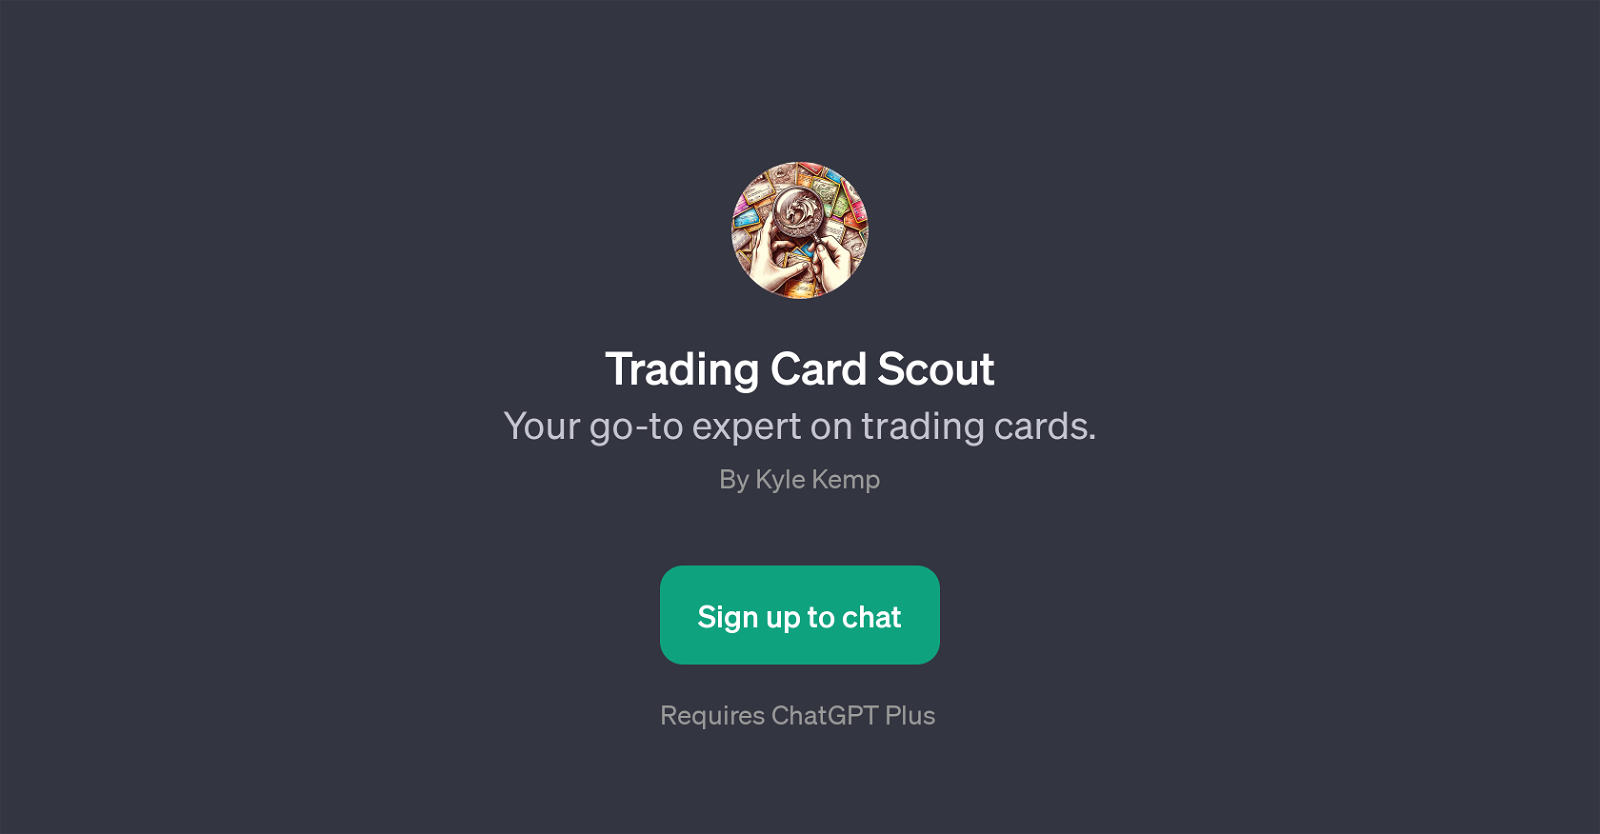 Trading Card Scout website